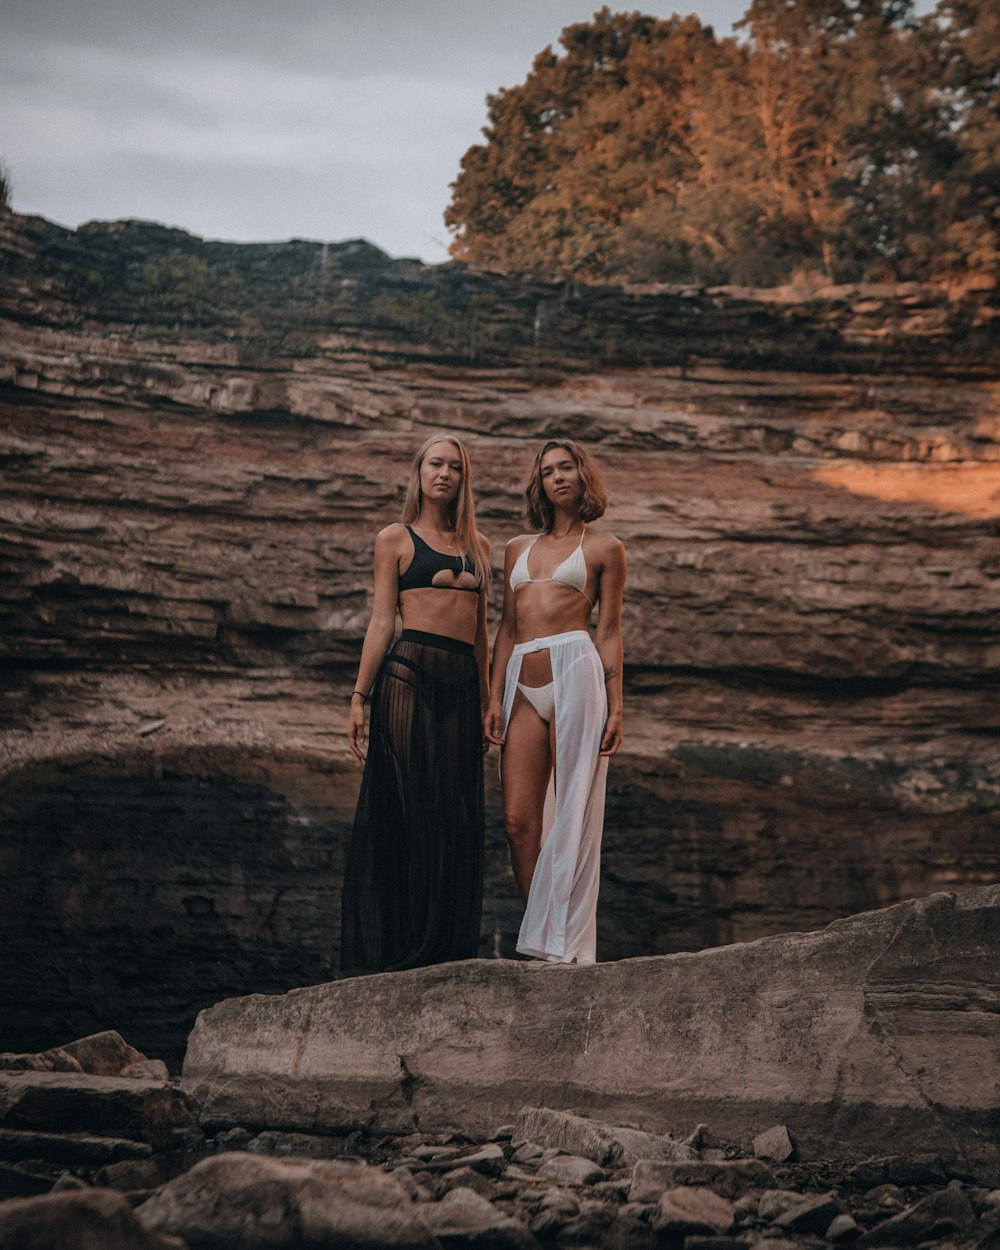 2 women in white dress standing on rock formation during daytime